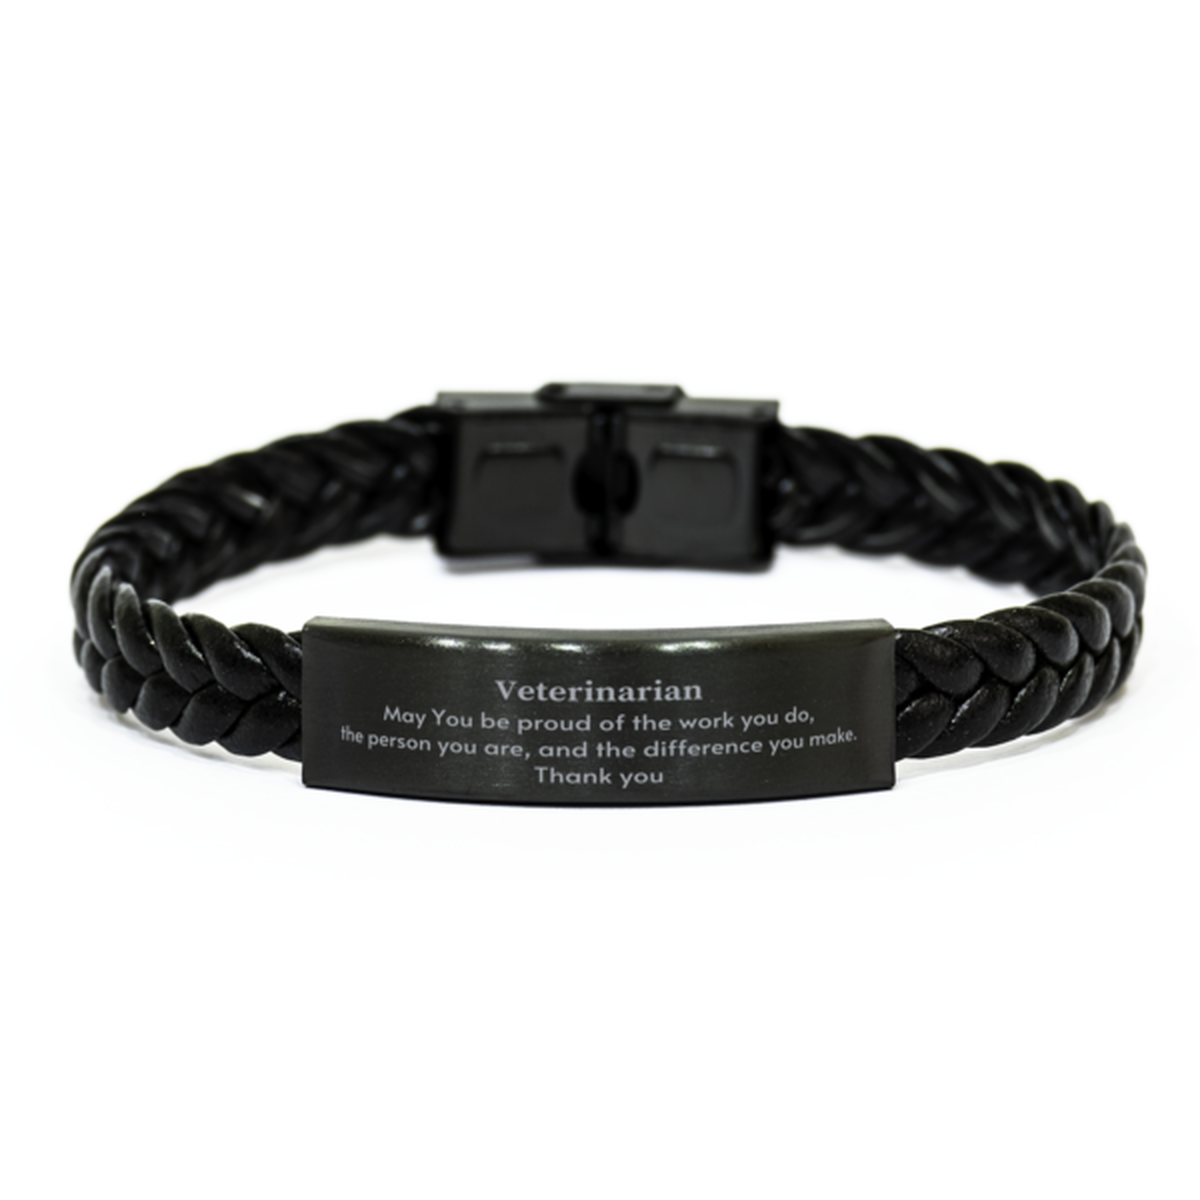 Heartwarming Braided Leather Bracelet Retirement Coworkers Gifts for Veterinarian, Veterinarian May You be proud of the work you do, the person you are Gifts for Boss Men Women Friends